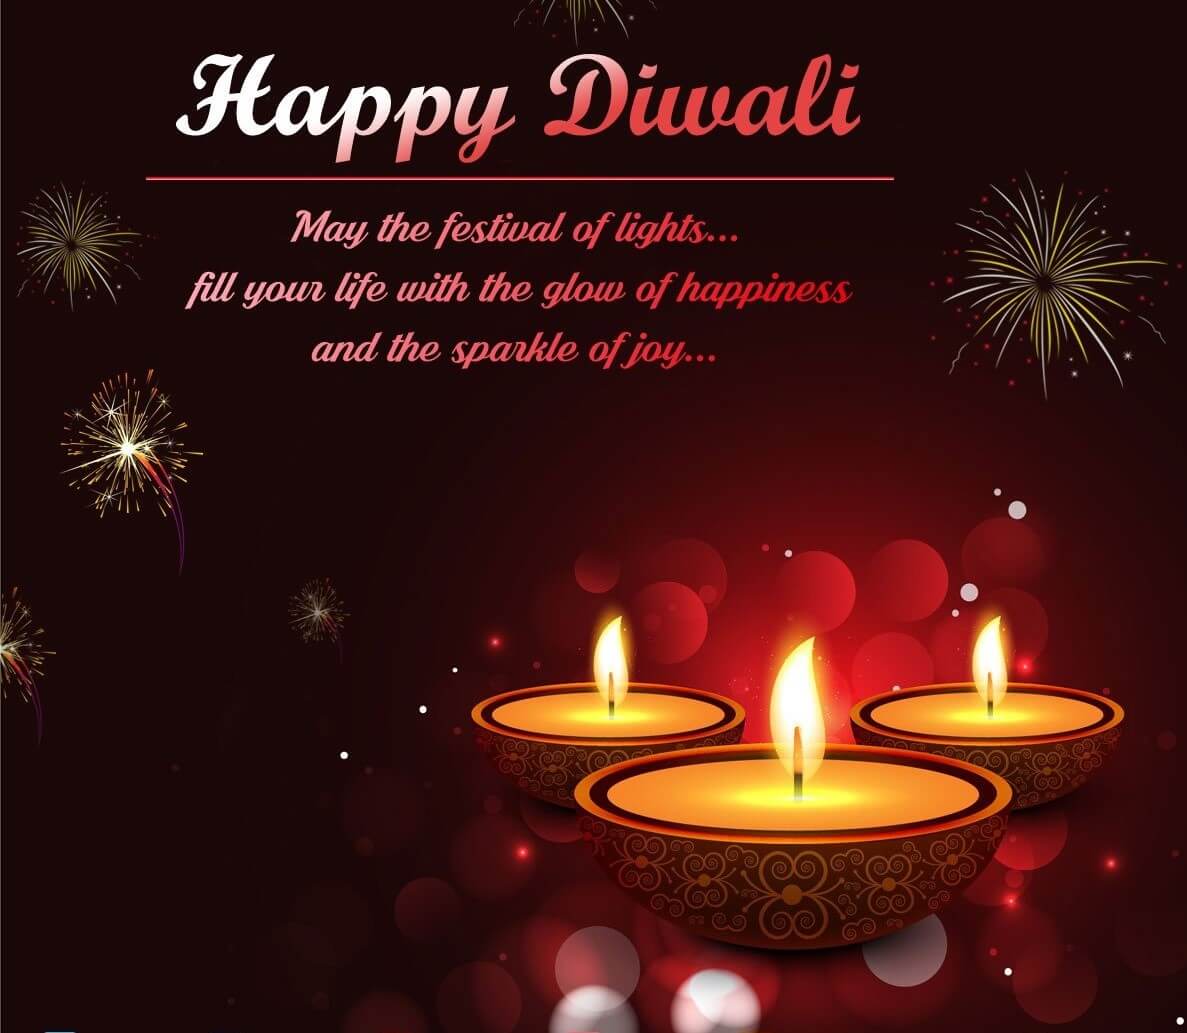 2022 Happy Diwali Image, Photo, Picture, Wallpaper for WhatsApp